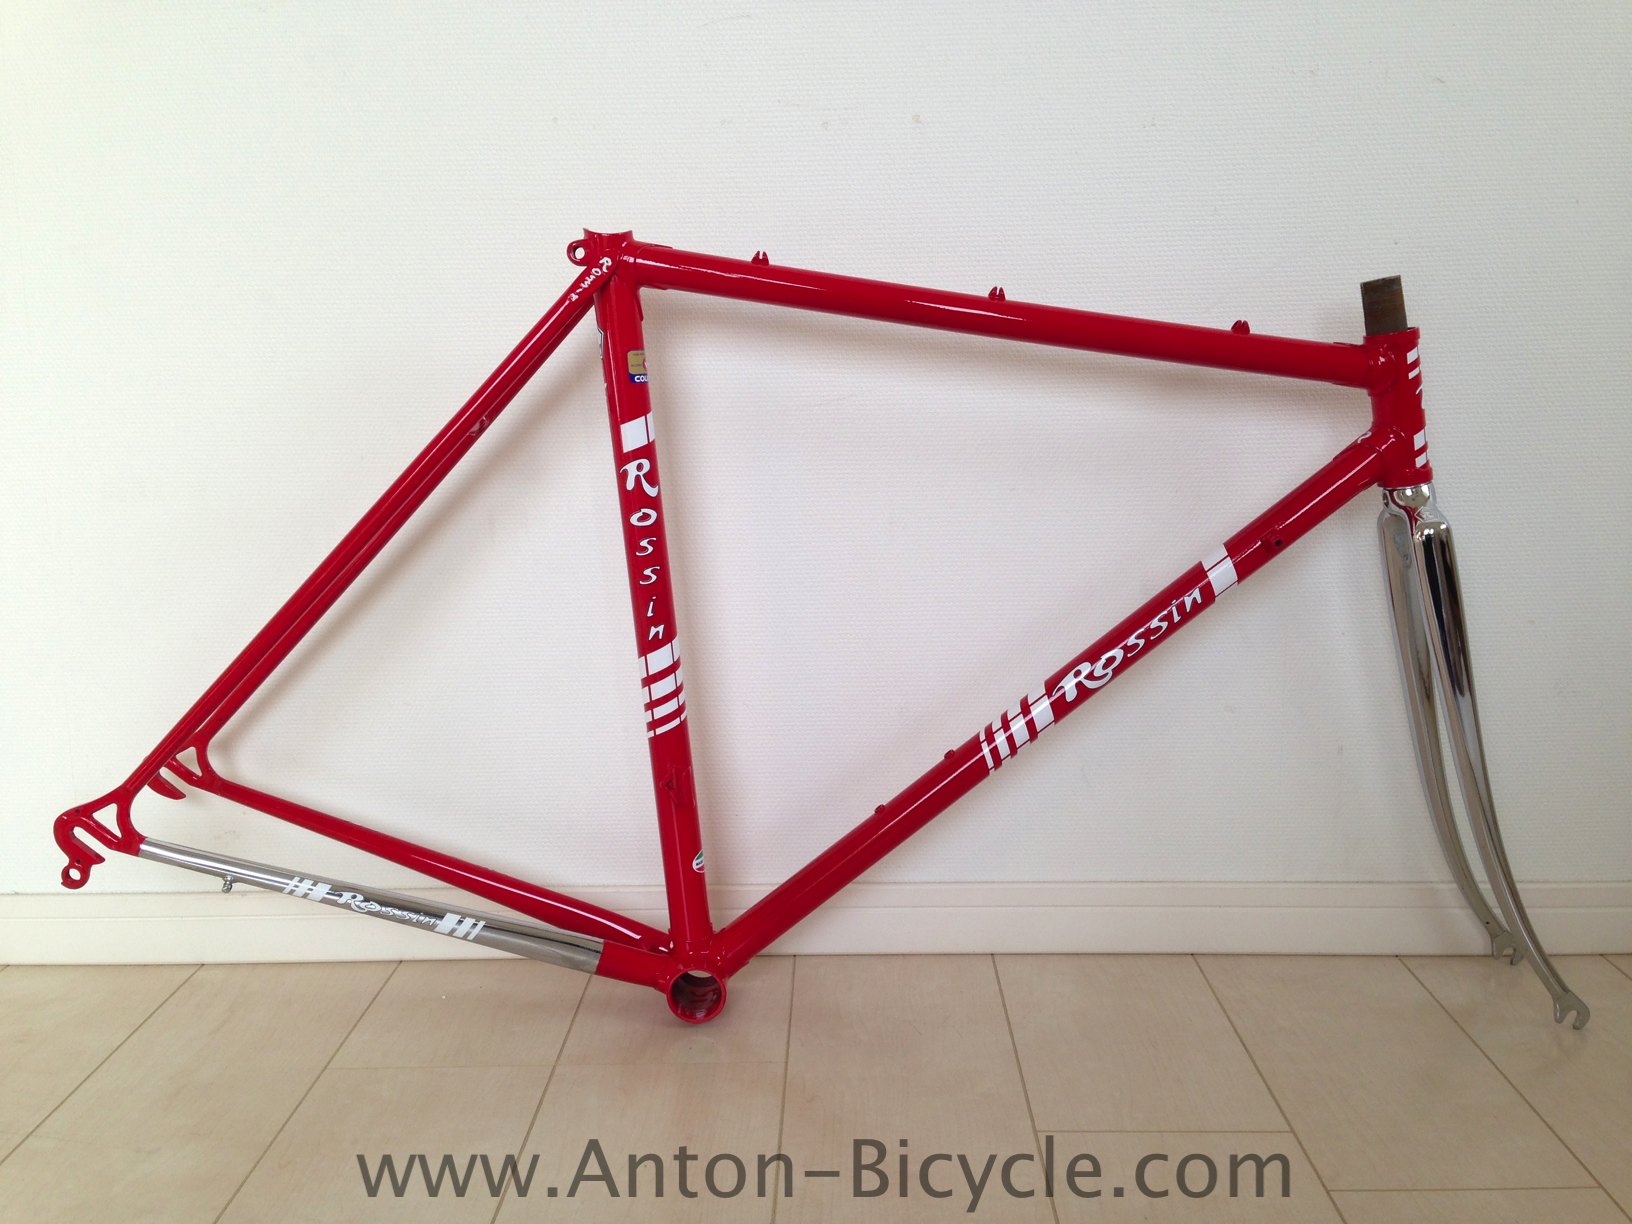 rossin-super-record-frame-red-51